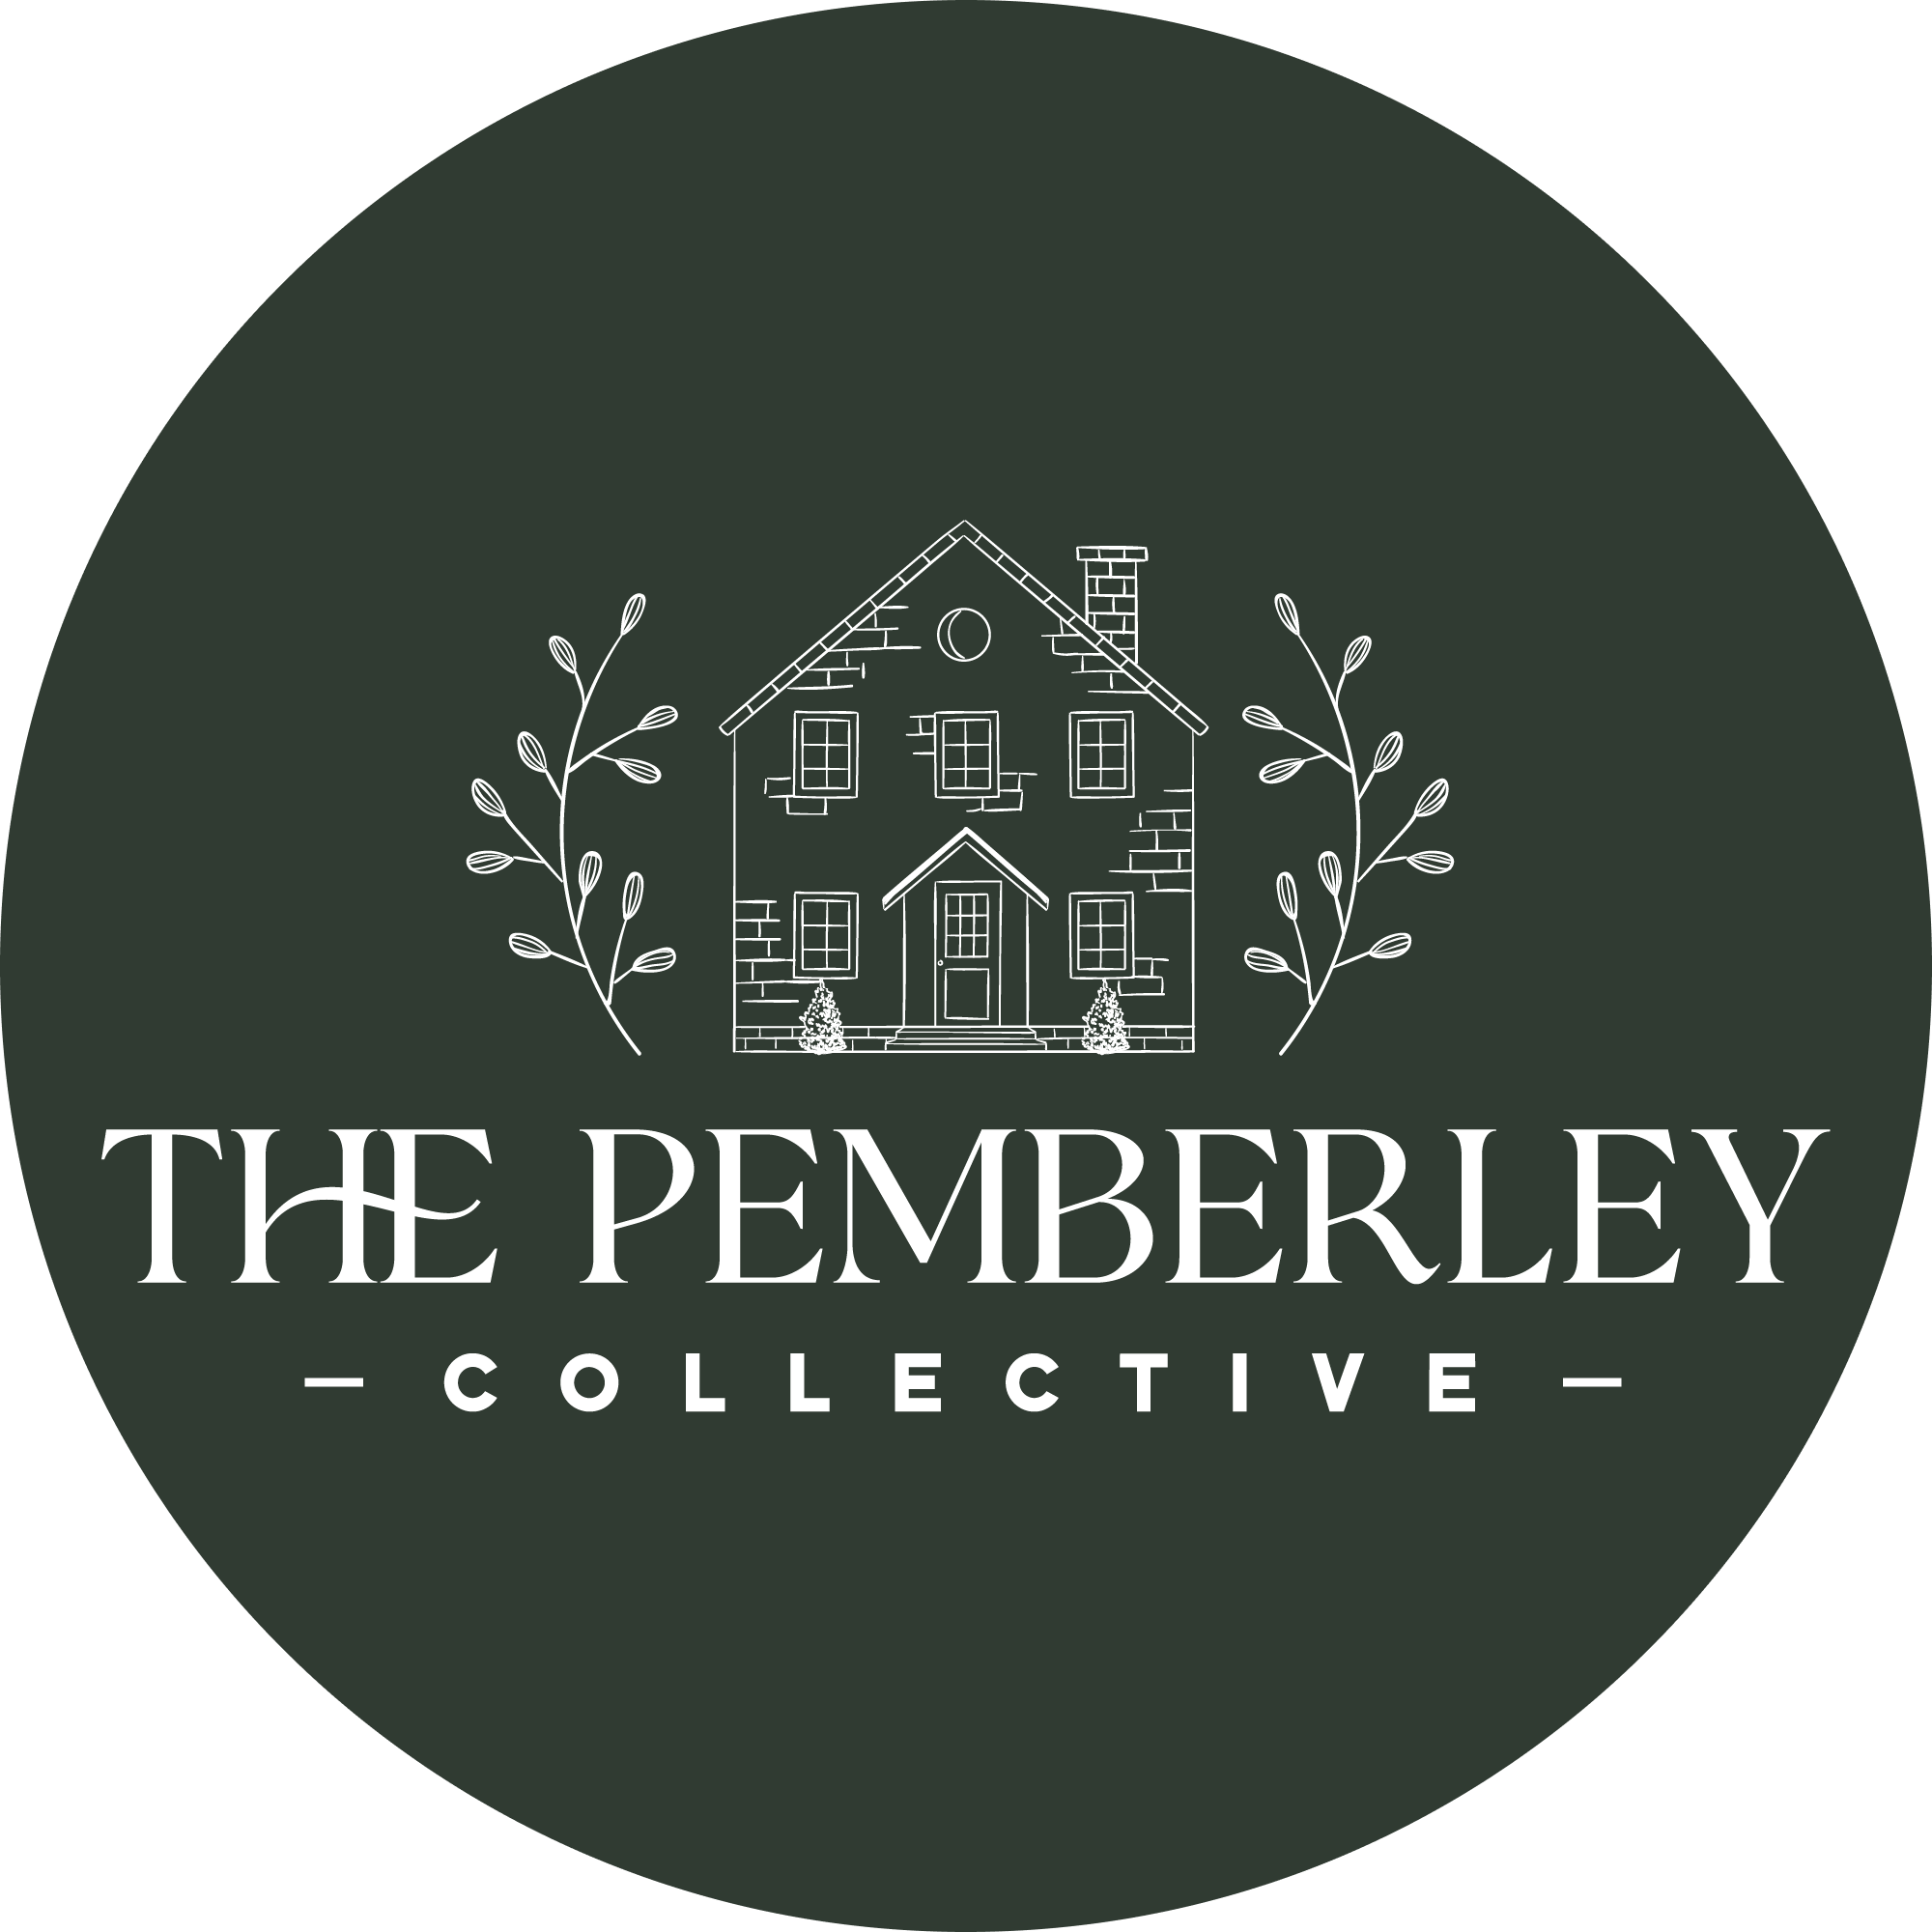 The Pemberley Collective